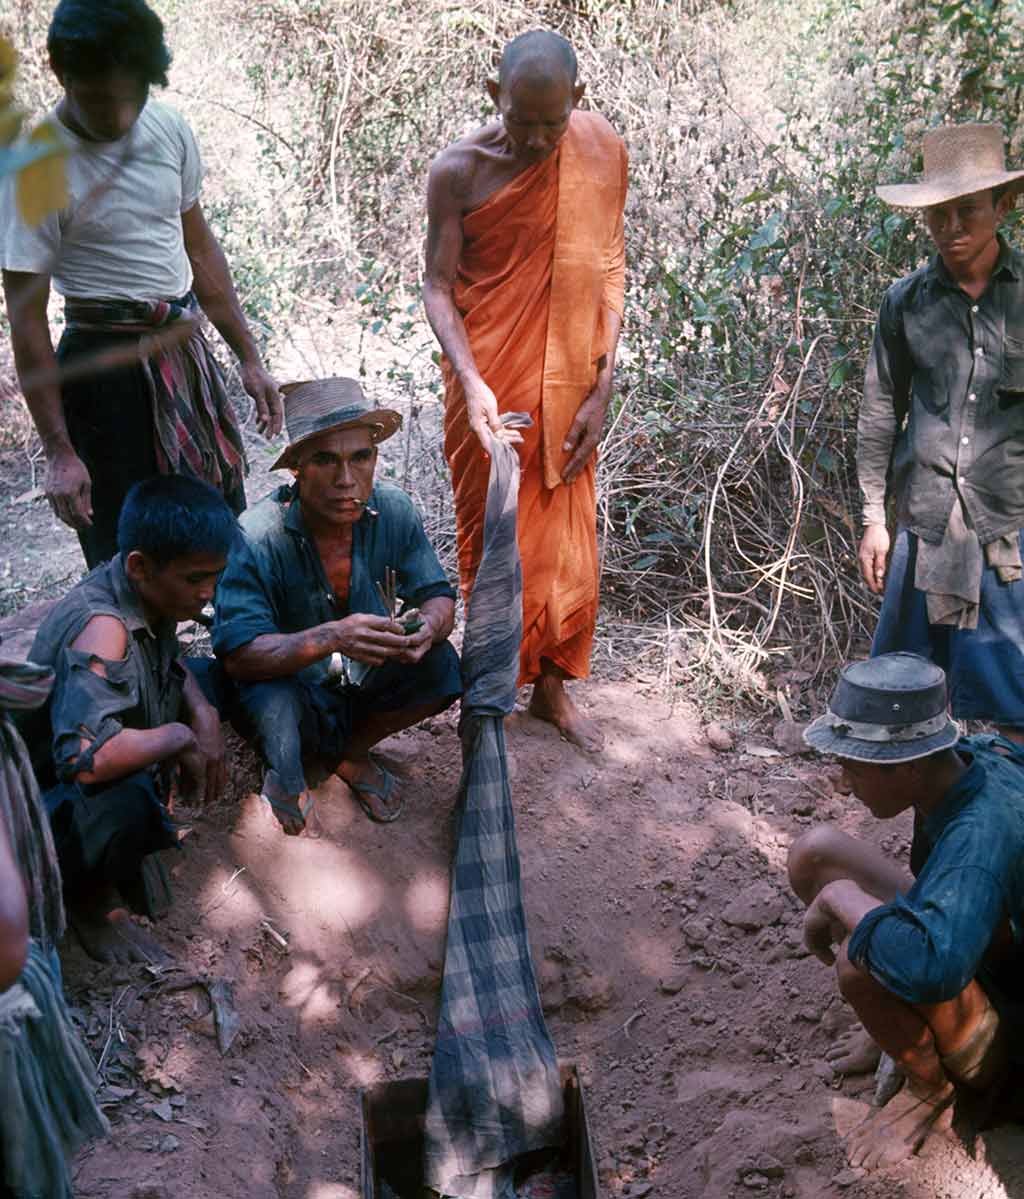 monk holding cloth staring down, in clearing, people around him